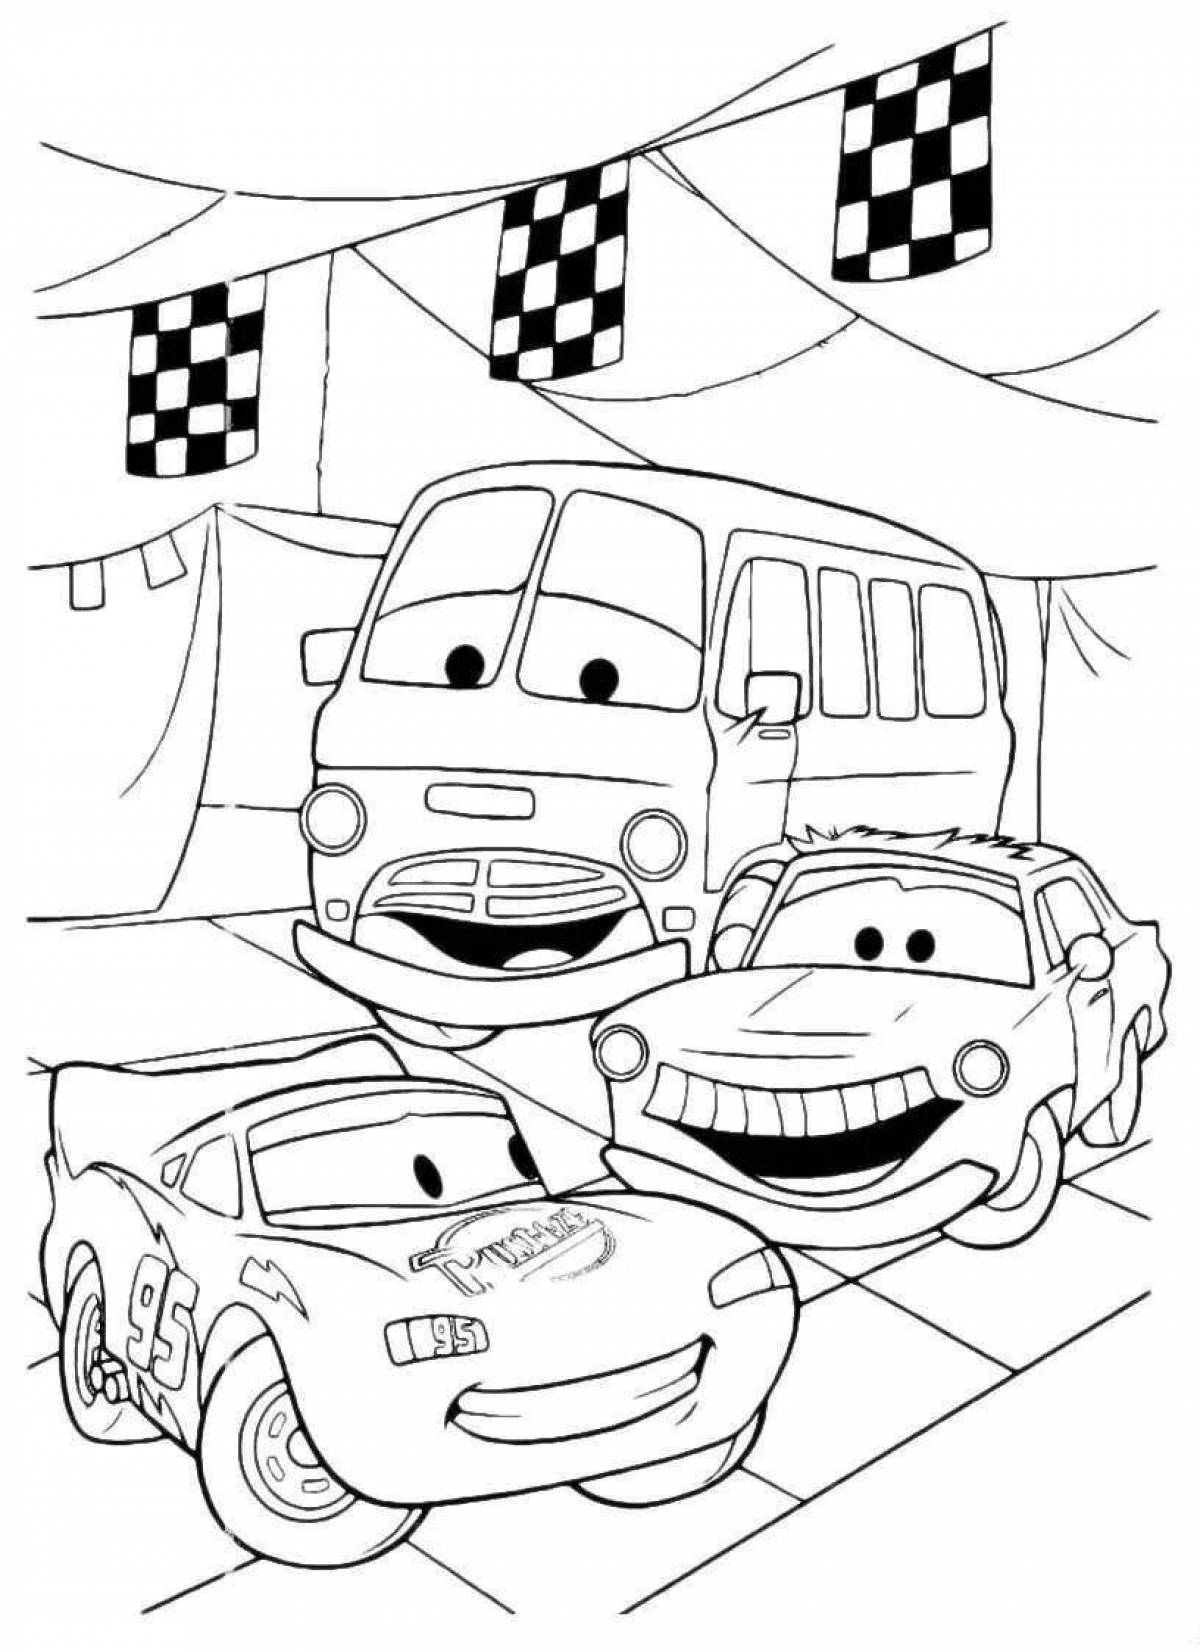 Coloring majestic cars for boys